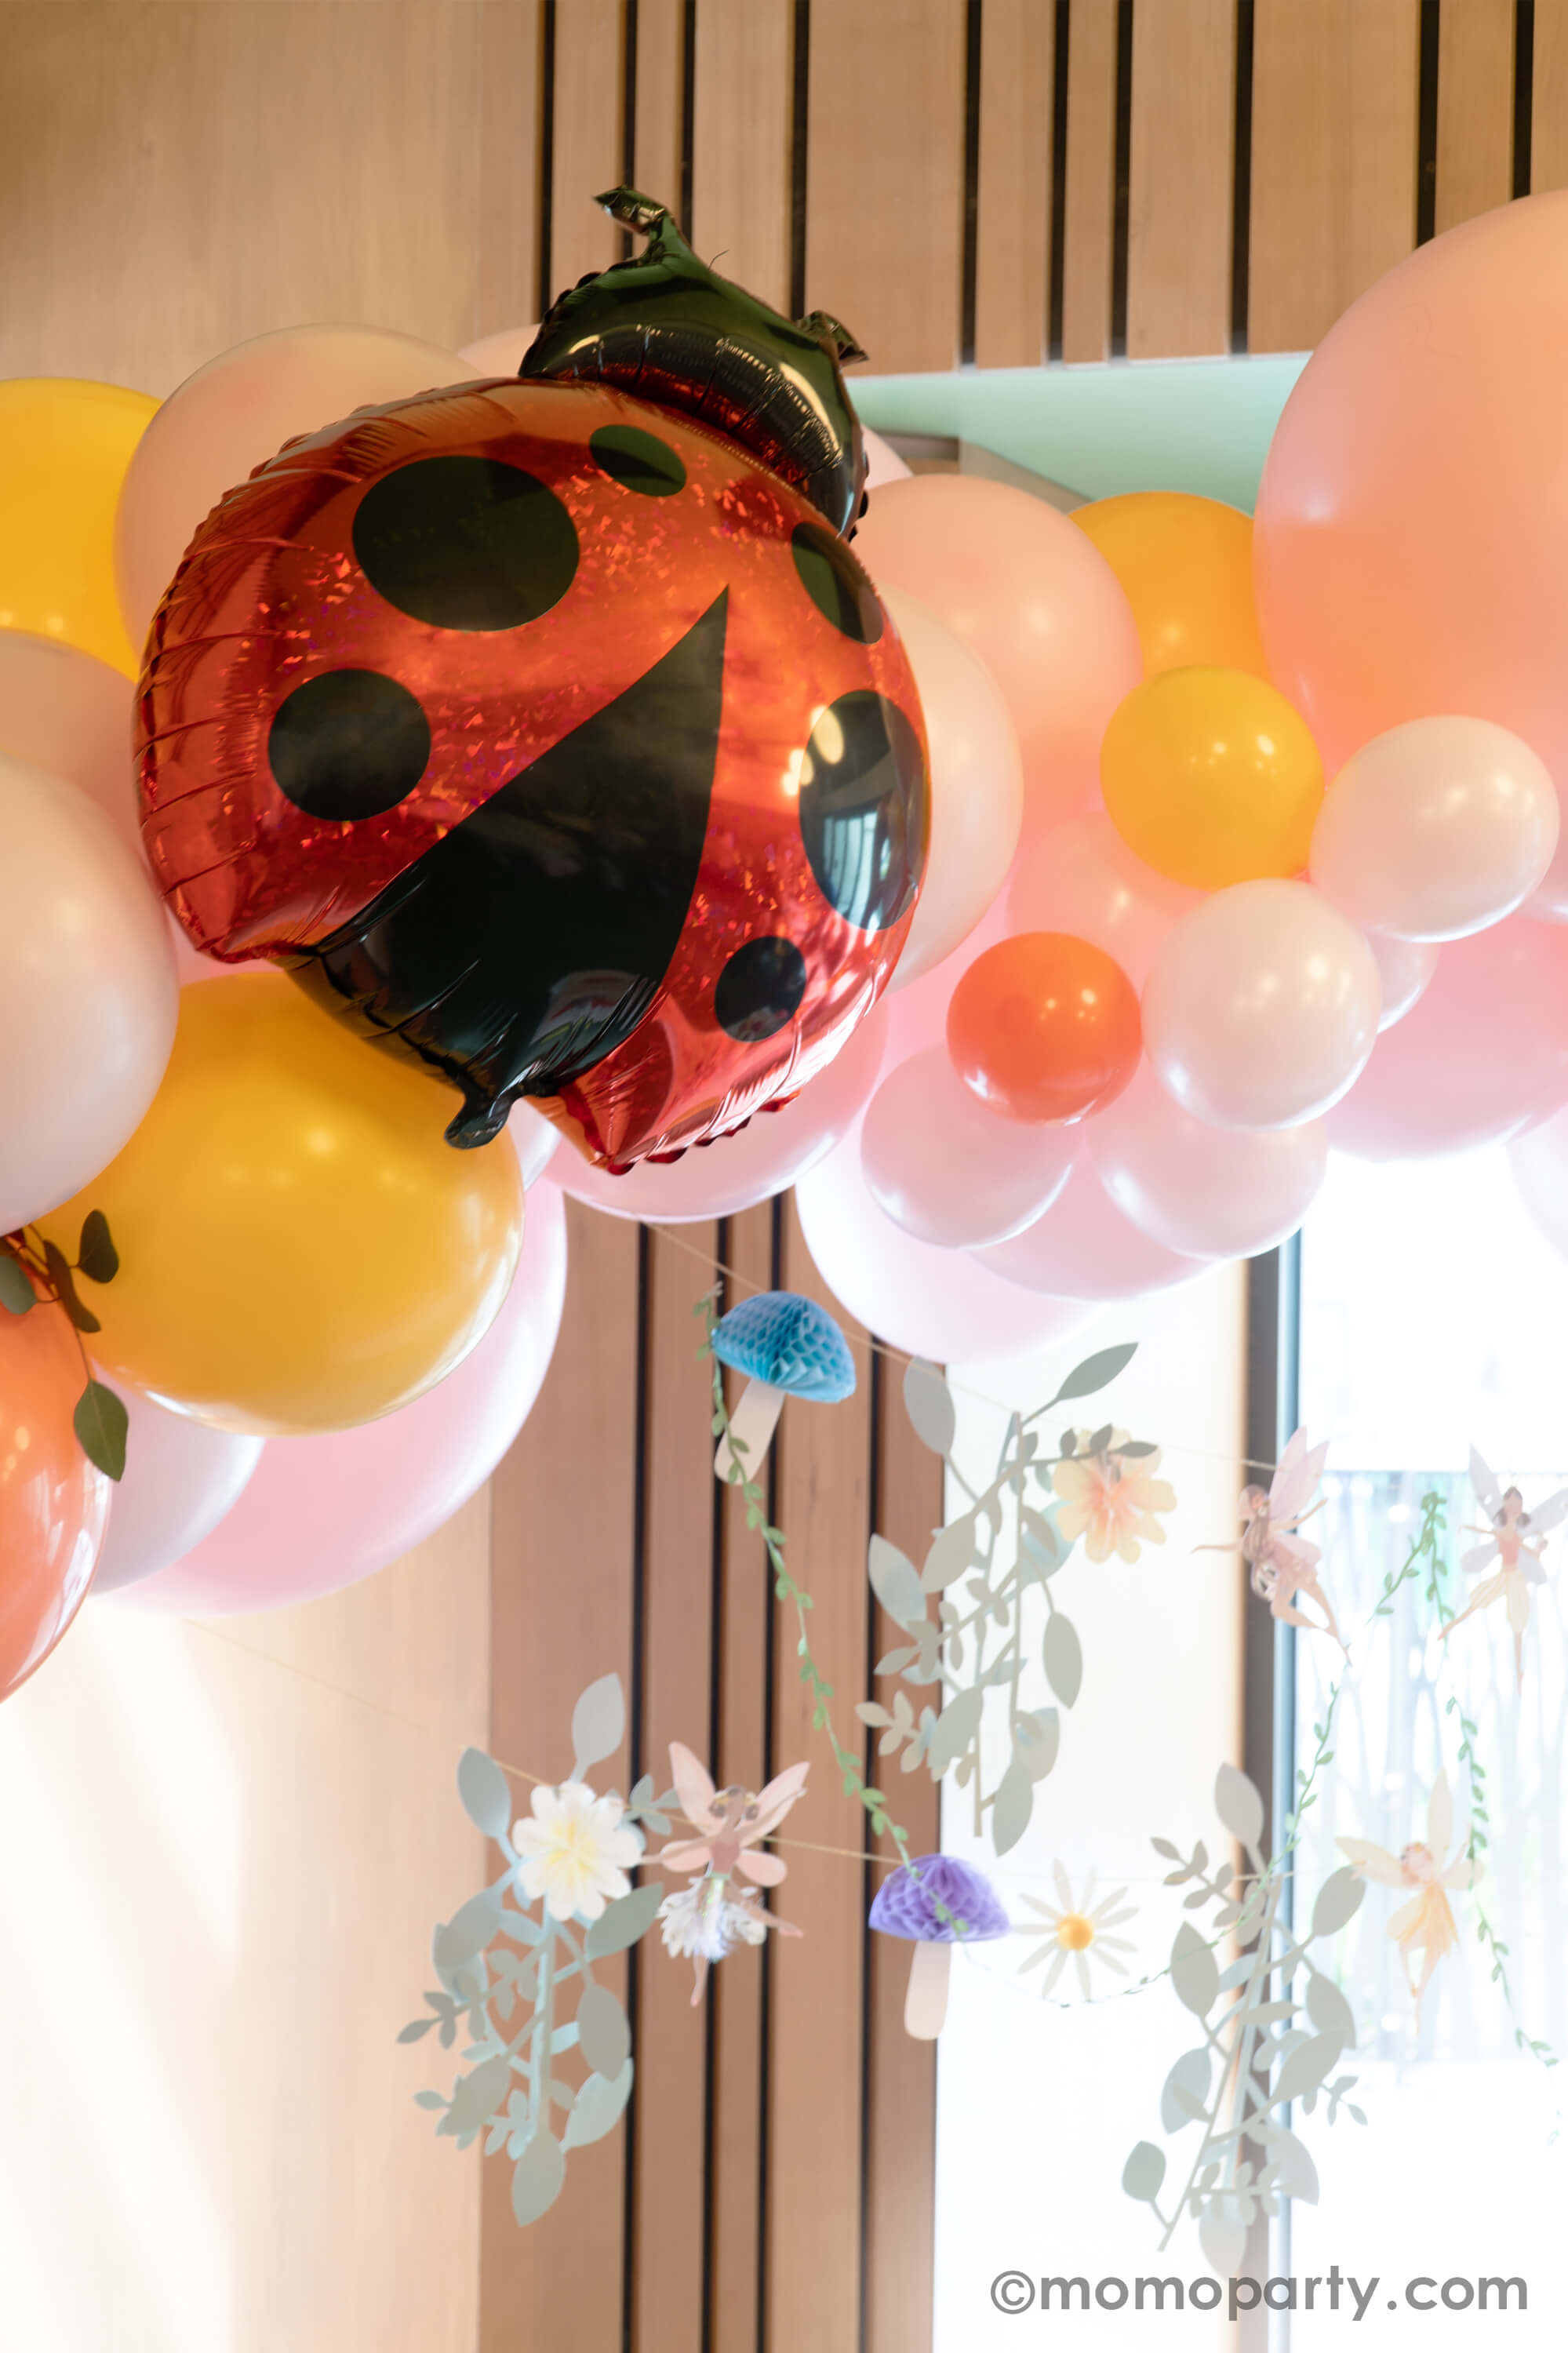 A spring fairy themed birthday party decoration featuring Momo Party's 27" ladybug shaped holographic foil balloon by Betallic Balloons on a spring inspired balloon garland in pastel pink, goldenrod, coral colors, with Momo Party's 6ft fairy garland by Meri Meri hung below it. All creates a beautiful decoration set up for a girl's birthday party in spring.